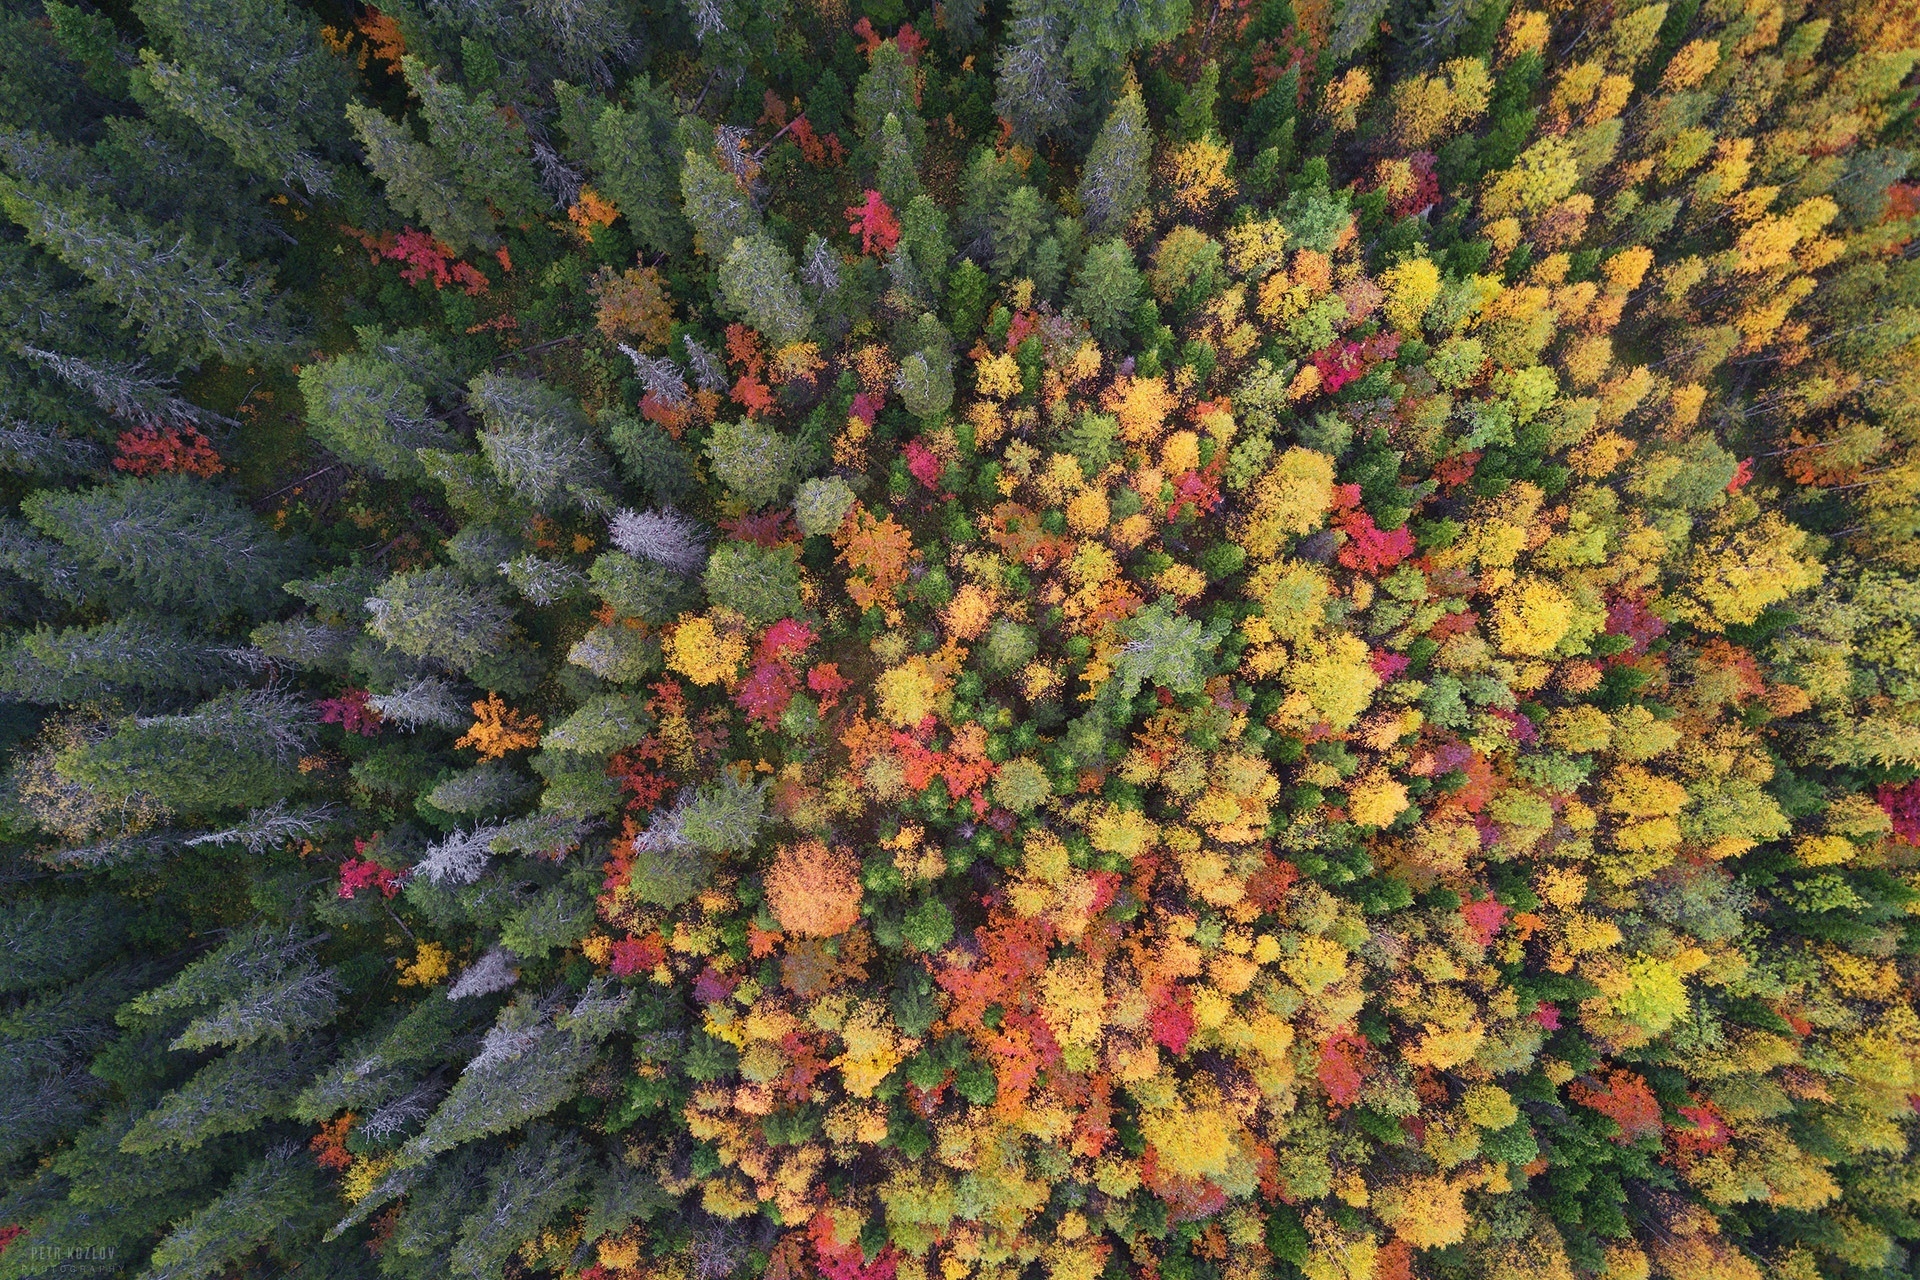 Autumn in the Ural forest. - Nature, Ural, Forest, Autumn, Drone